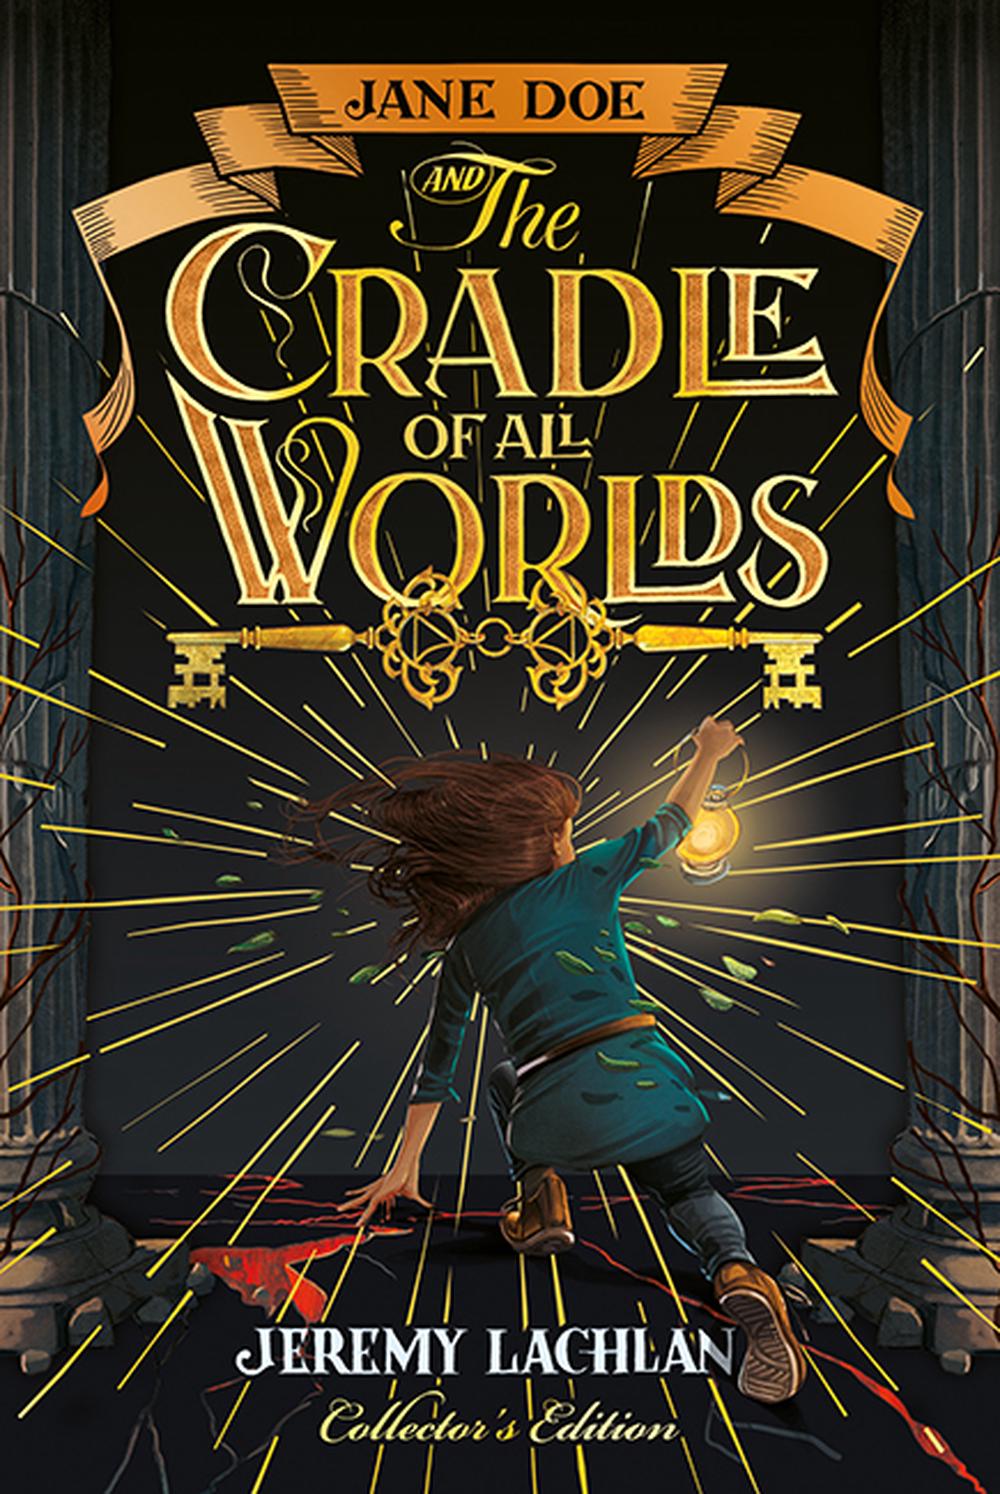 Jane Doe and the Cradle of All Worlds by Jeremy Lachlan, Hardcover